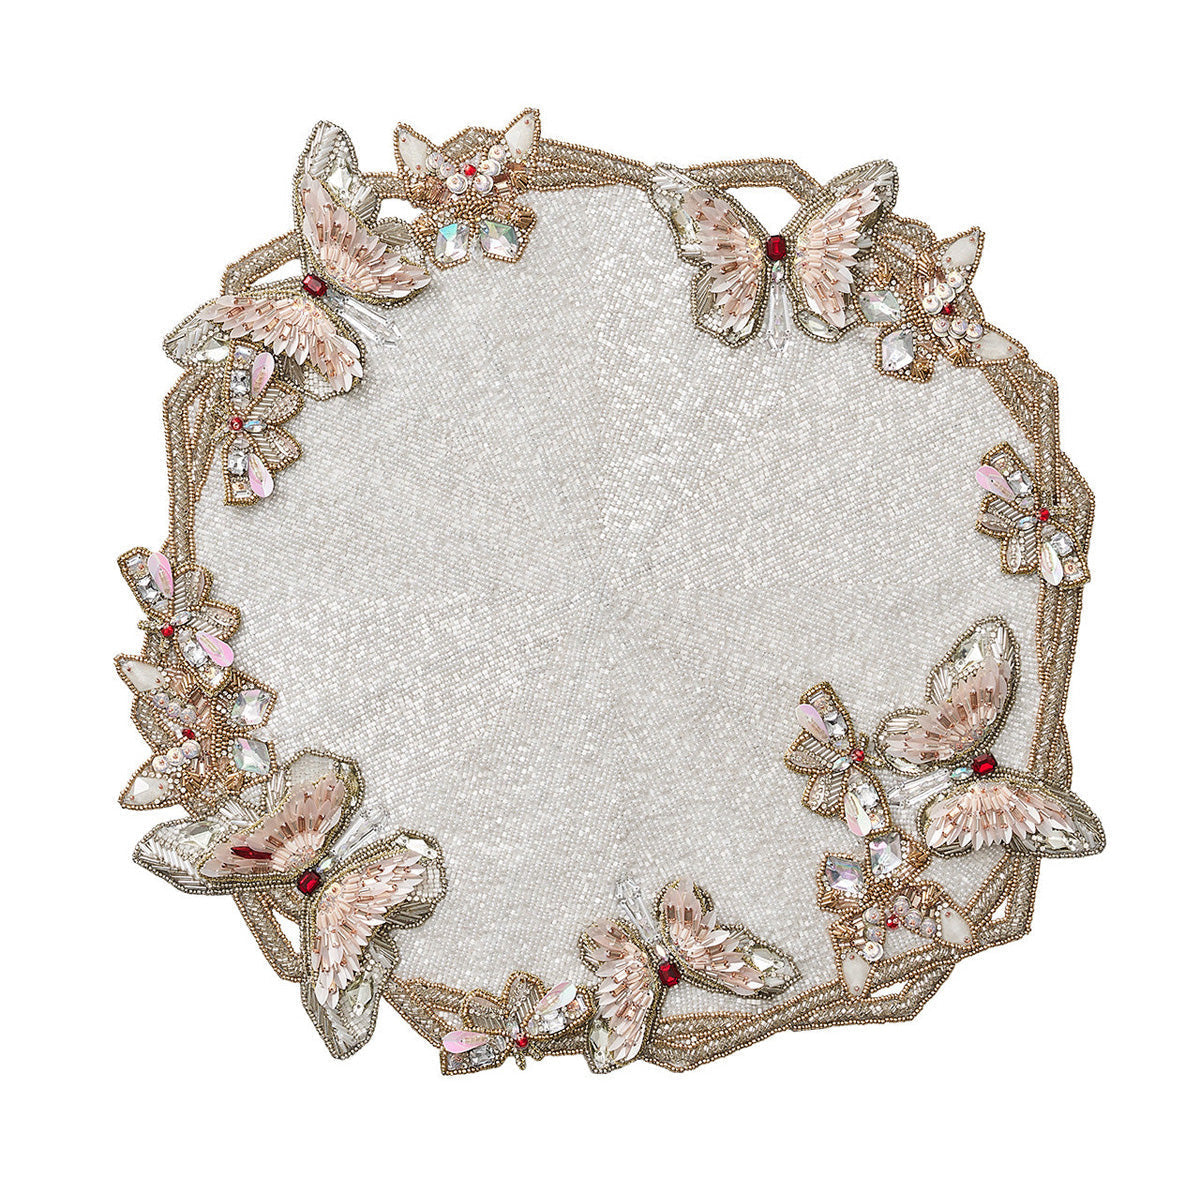 Diamant Butterflies Placemat in White & Blush - Set of 2 in a Gift Box by Kim Seybert